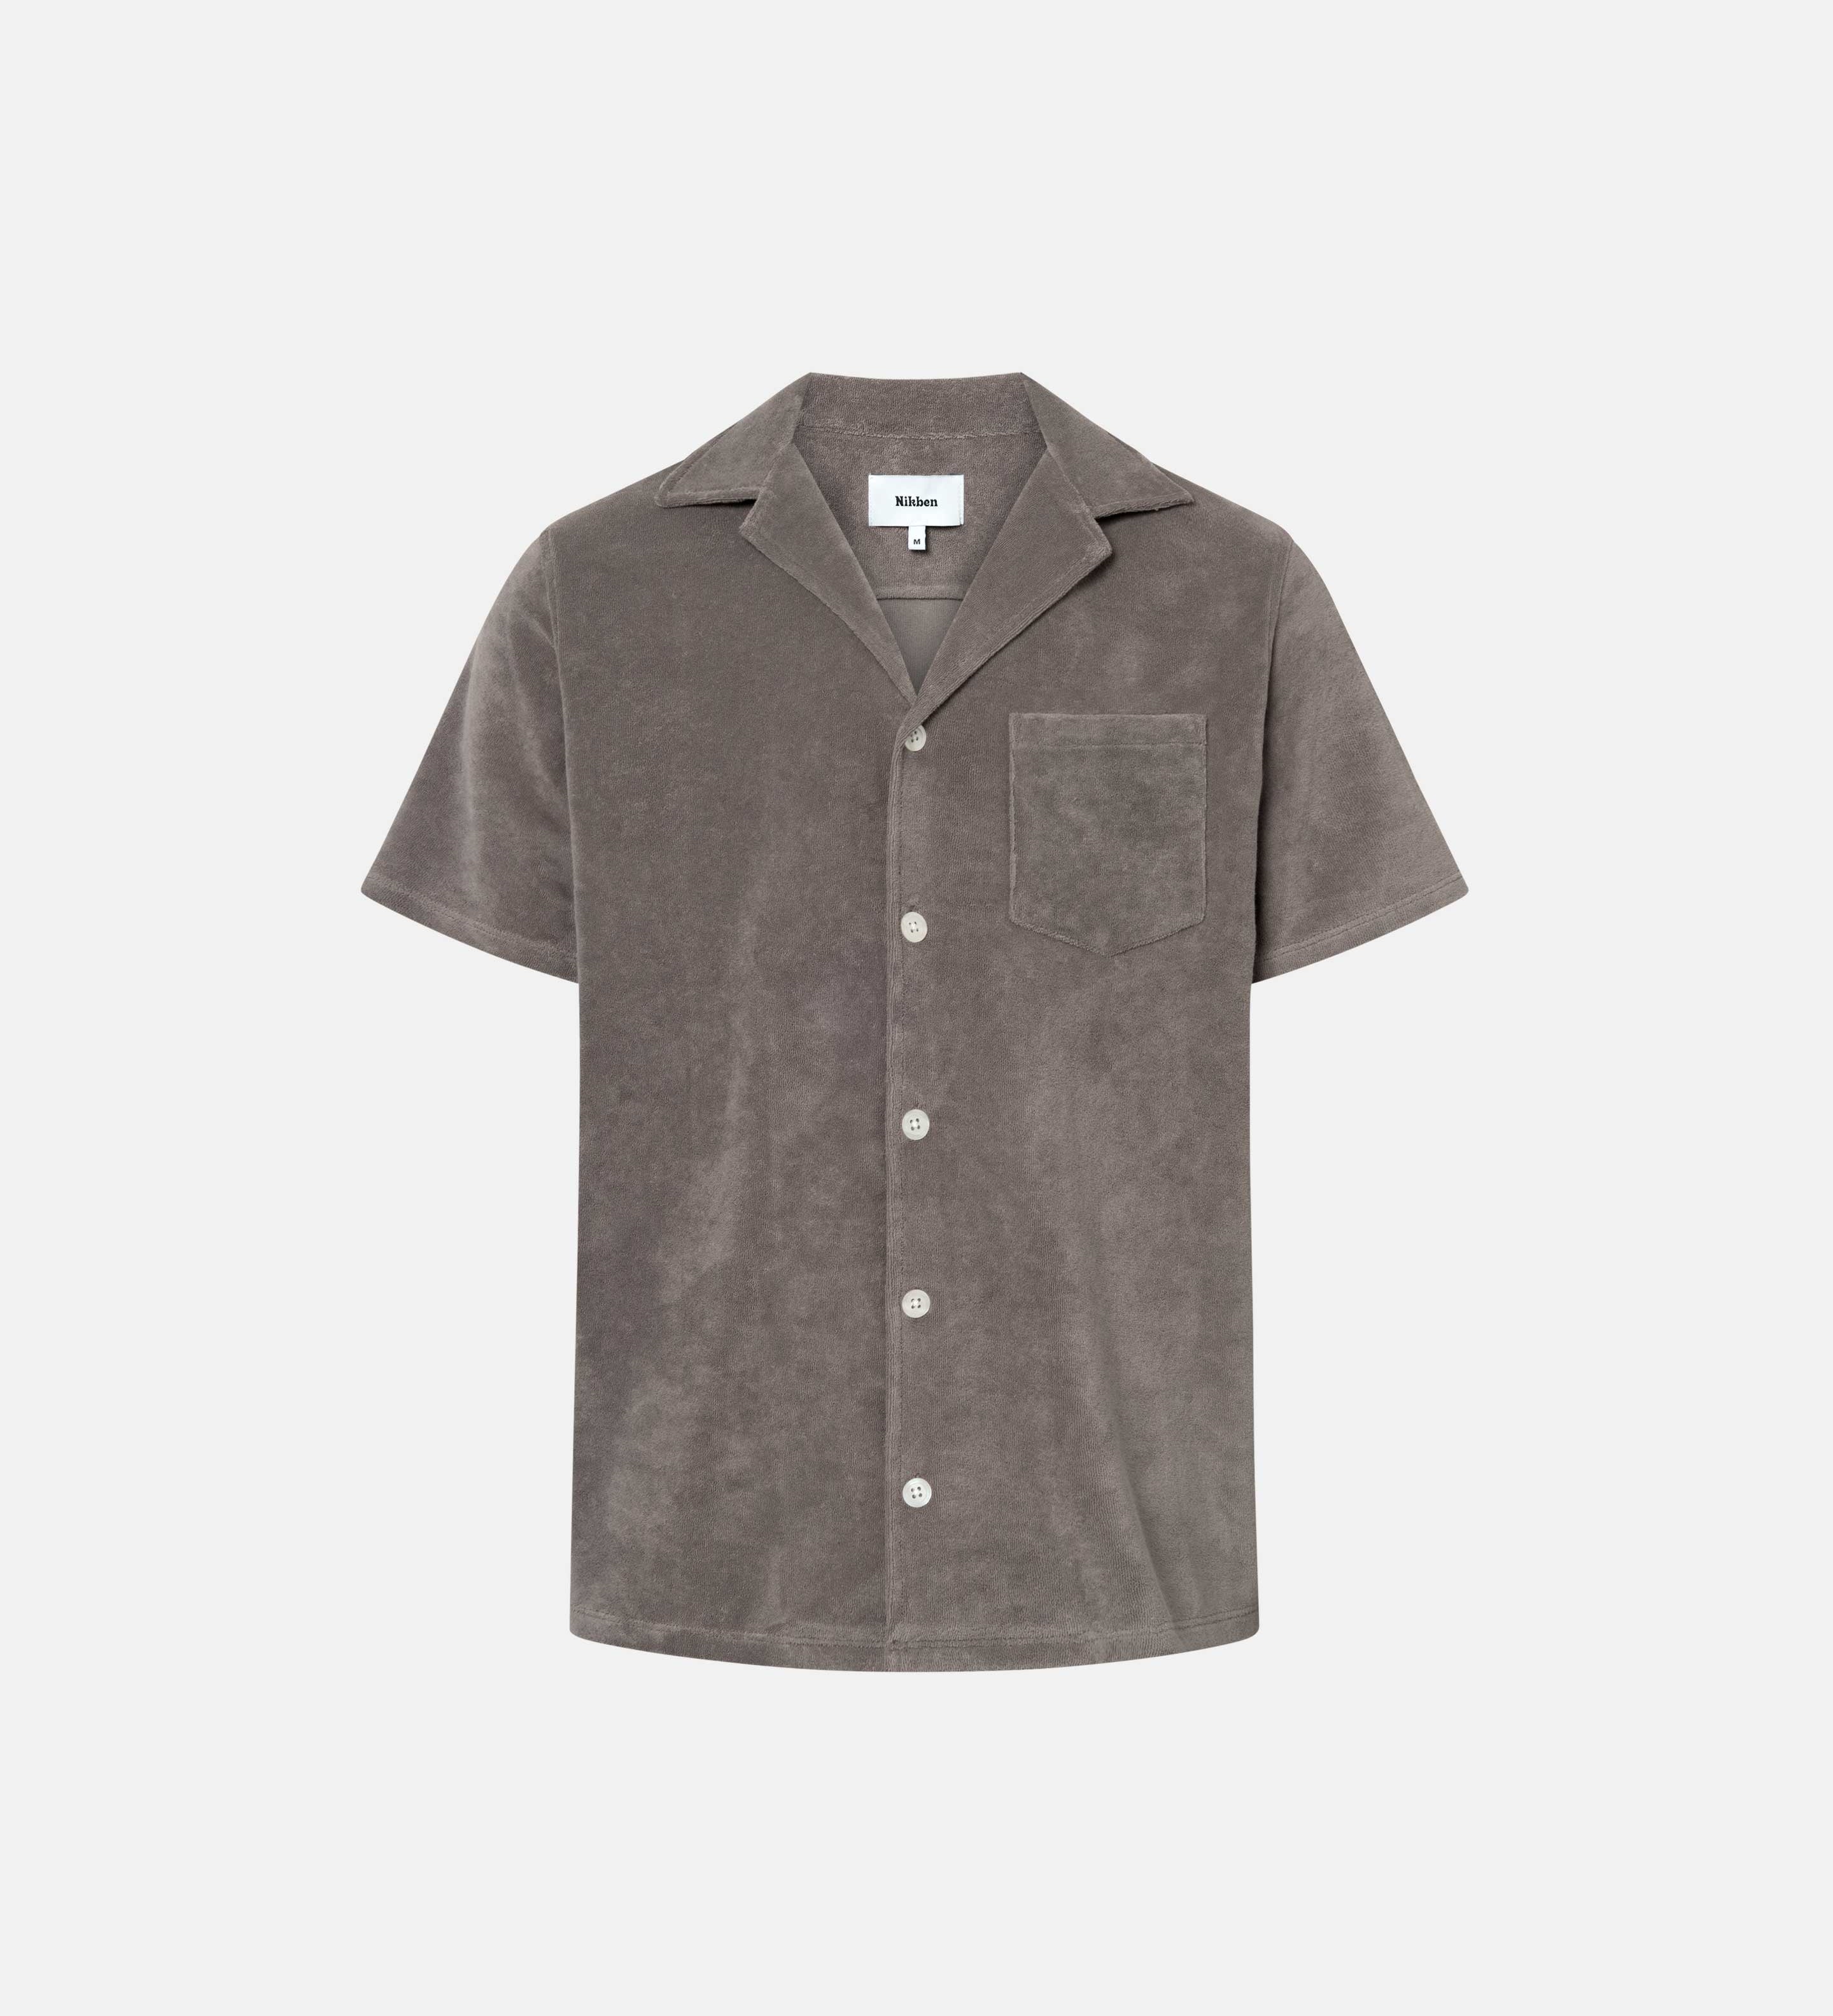 Dark grey short sleeve shirt with white button closure and one chest pocket